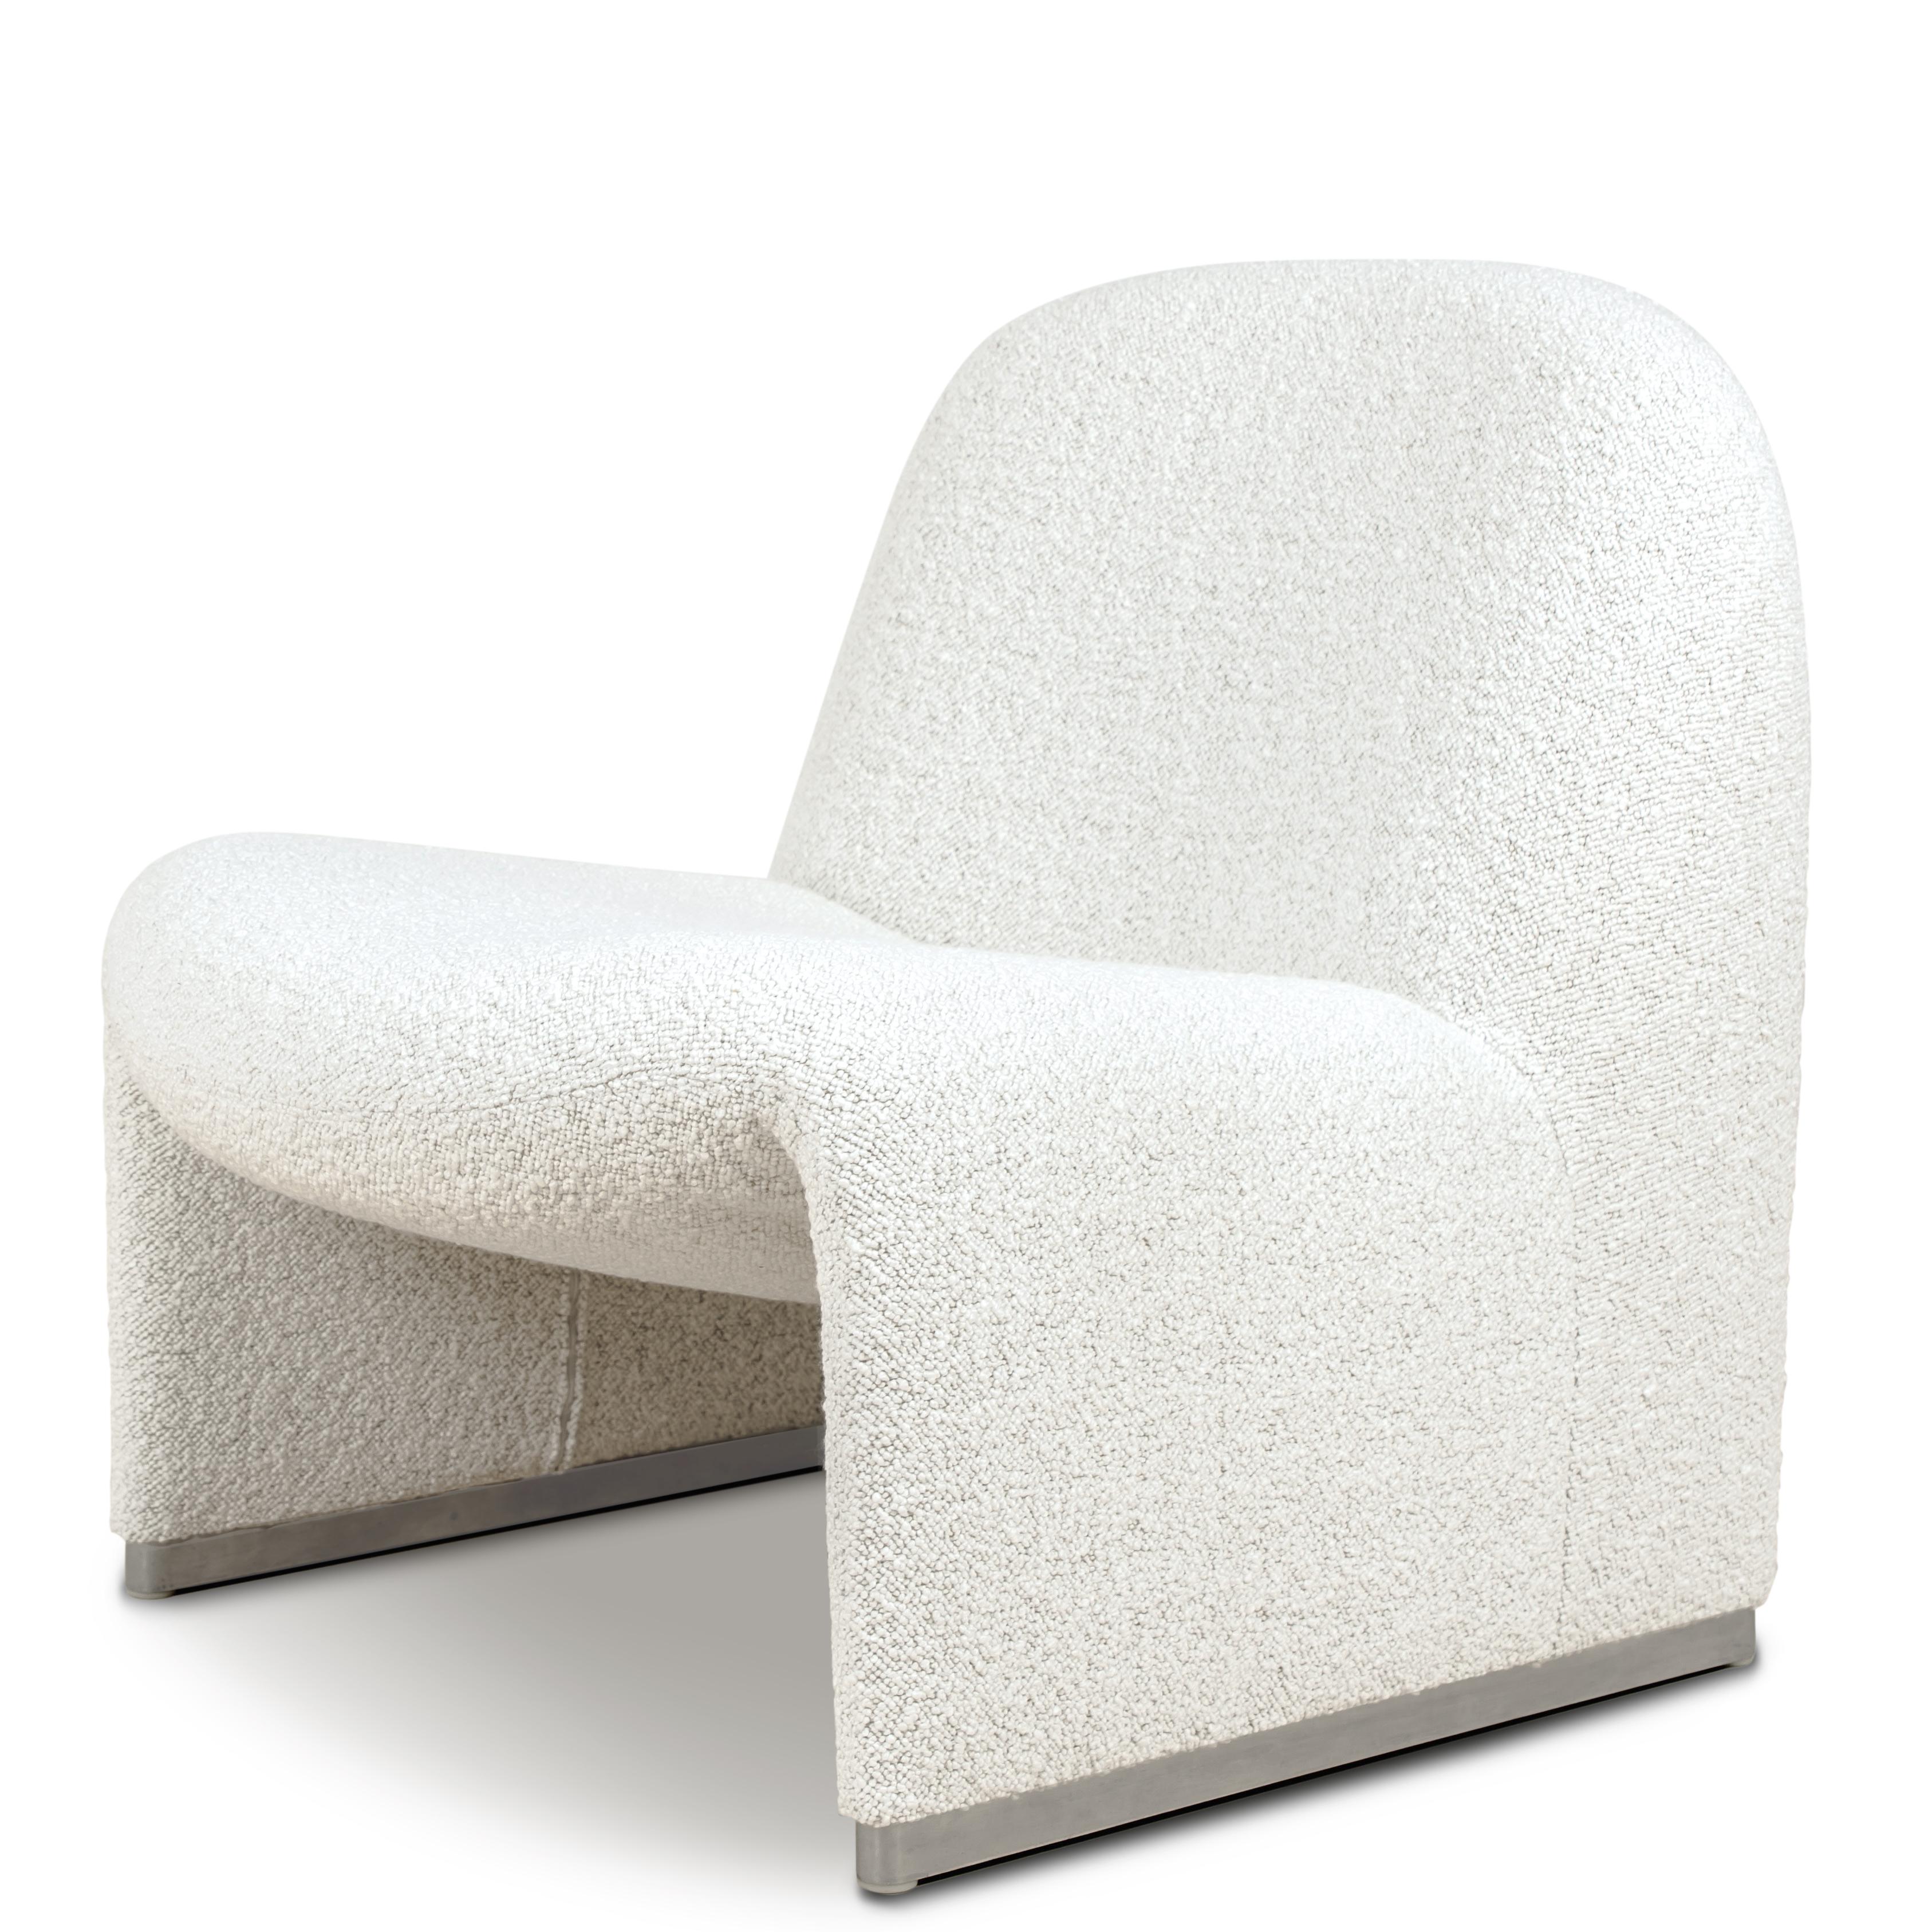 Alky Piretti Chairs, New Upholstered with Fabric Dedar, Italy 1